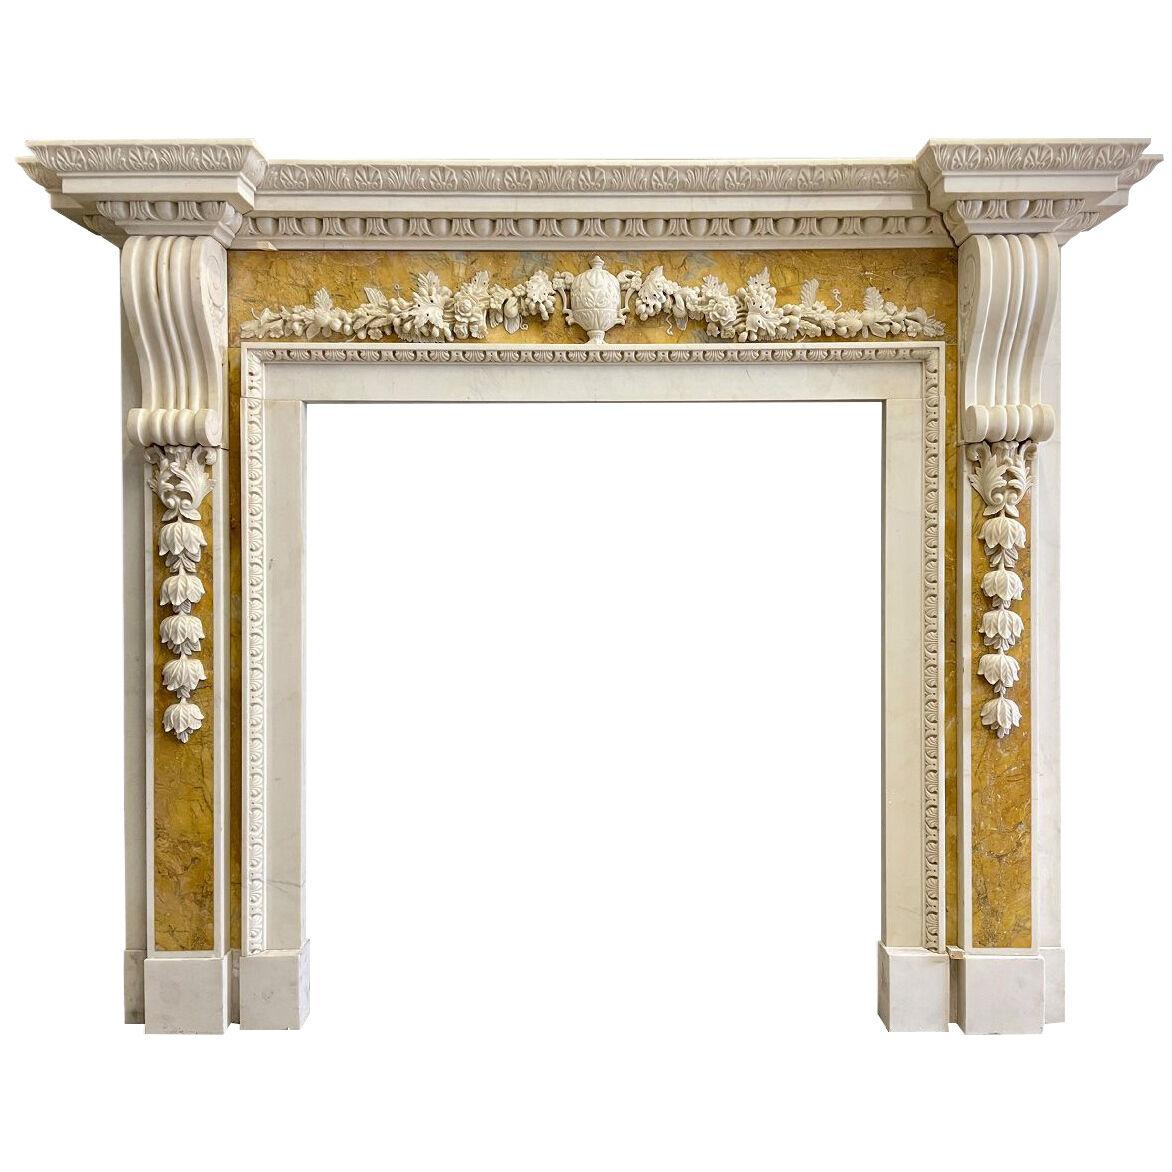 A Georgian Style White and Siena Marble Fireplace Mantel 